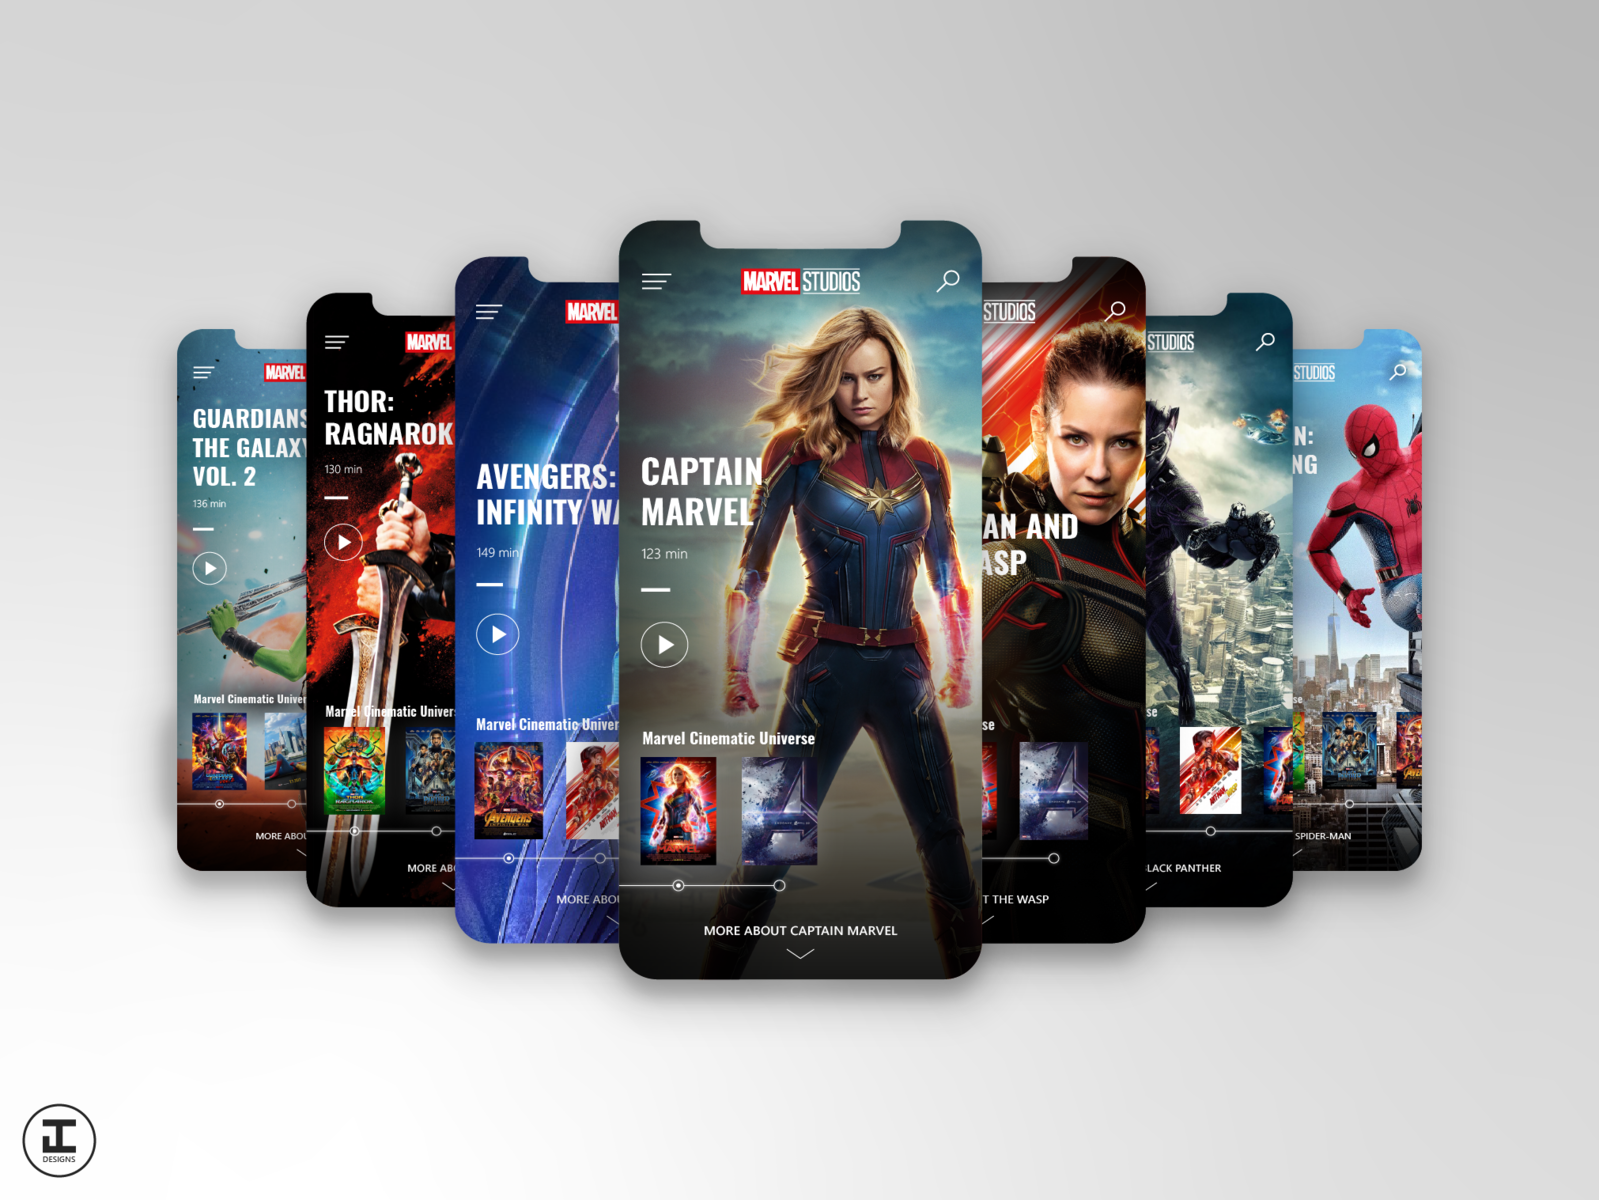 download the new version for iphoneCaptain Marvel